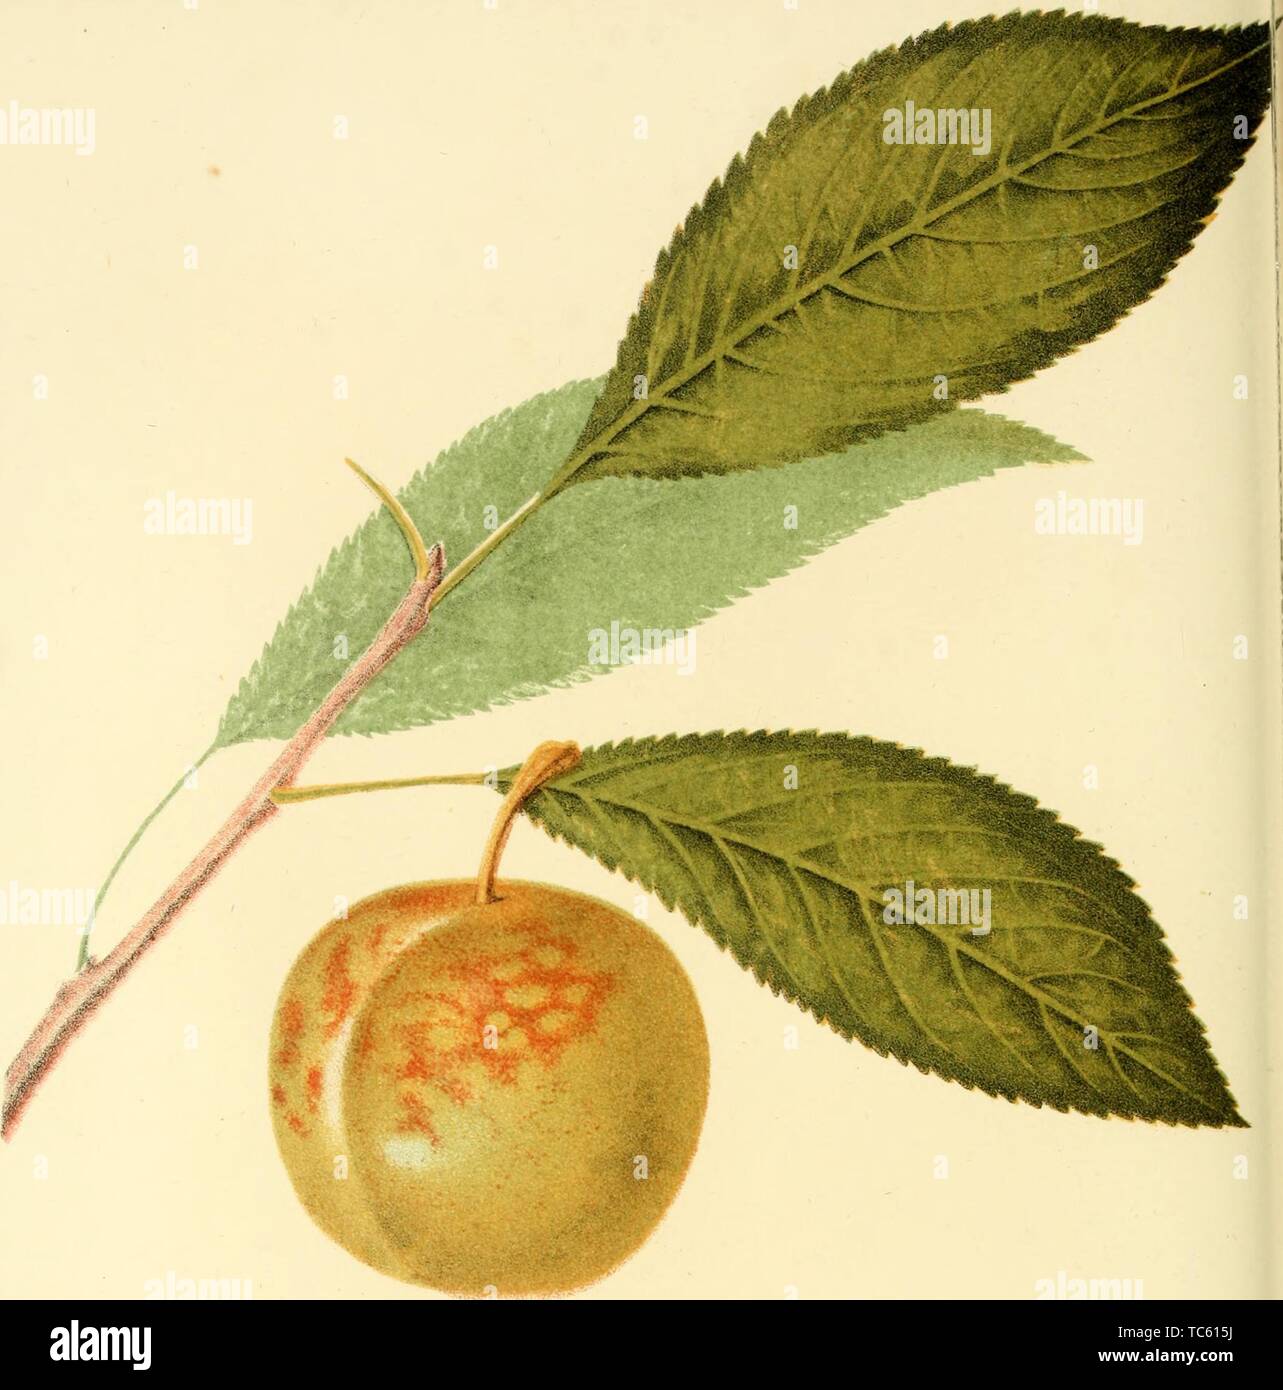 Engraving of the Green Gage Plum, from the book 'The fruits of America' by Charles Mason Hovey, 1848. Courtesy Internet Archive. () Stock Photo